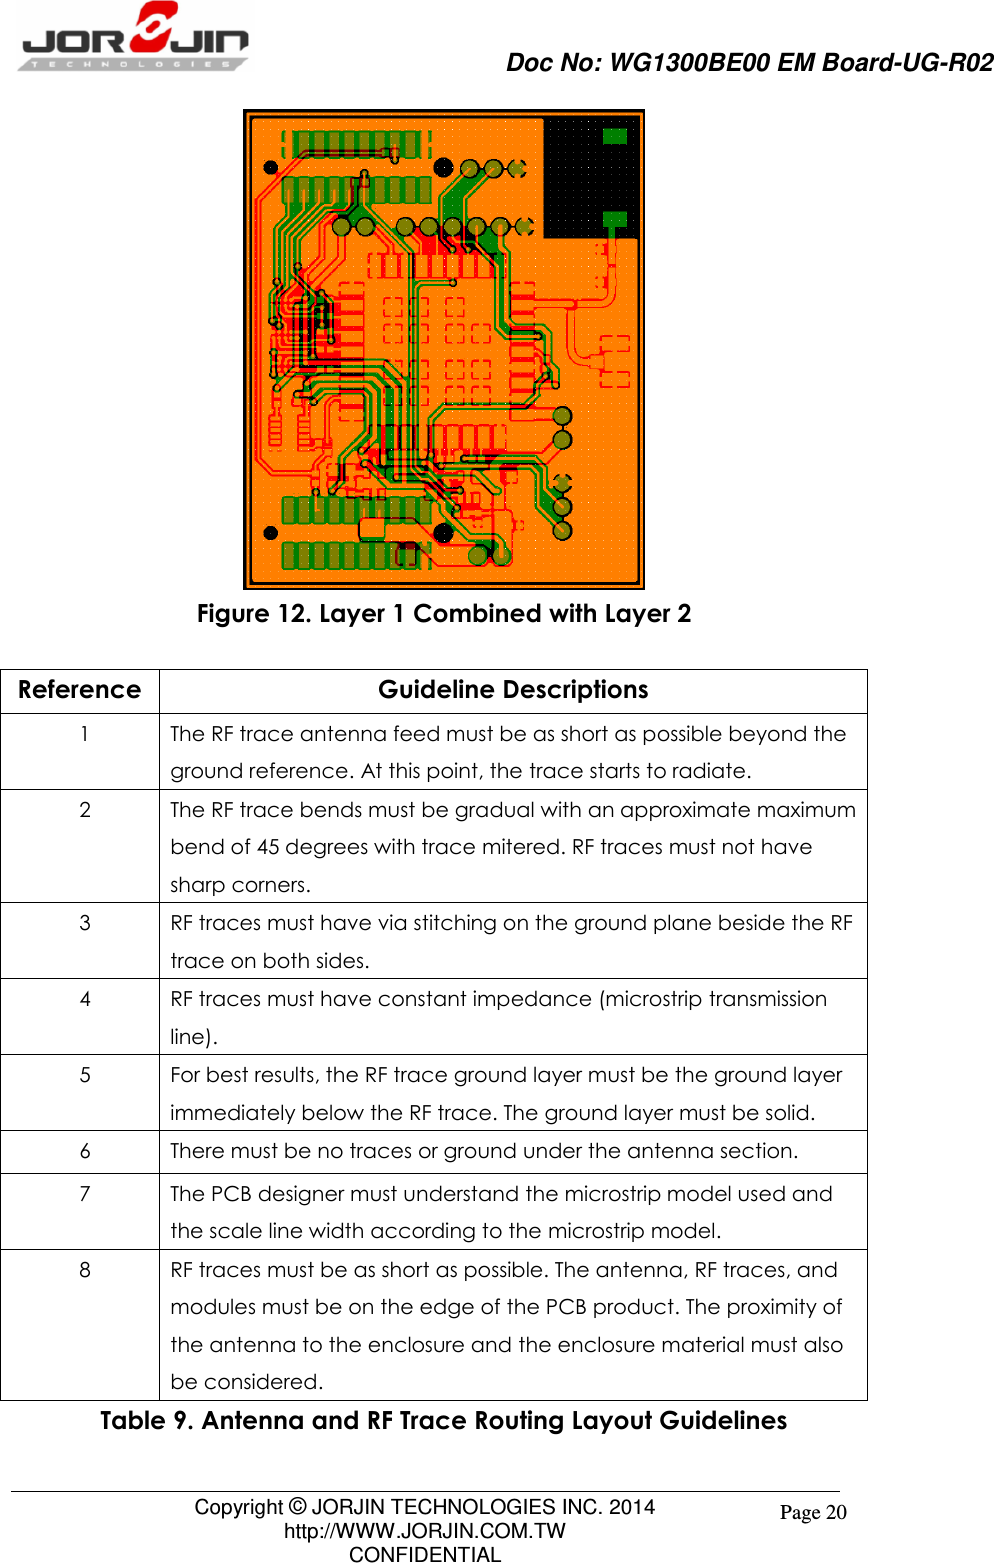                     Doc No: WG1300BE00 EM Board-UG-R02                                                                                        Copyright © JORJIN TECHNOLOGIES INC. 2014 http://WWW.JORJIN.COM.TW CONFIDENTIAL Page 20  Figure 12. Layer 1 Combined with Layer 2  Reference Guideline Descriptions 1 The RF trace antenna feed must be as short as possible beyond the ground reference. At this point, the trace starts to radiate. 2  The RF trace bends must be gradual with an approximate maximum bend of 45 degrees with trace mitered. RF traces must not have sharp corners. 3 RF traces must have via stitching on the ground plane beside the RF trace on both sides. 4 RF traces must have constant impedance (microstrip transmission line). 5 For best results, the RF trace ground layer must be the ground layer immediately below the RF trace. The ground layer must be solid. 6 There must be no traces or ground under the antenna section. 7 The PCB designer must understand the microstrip model used and the scale line width according to the microstrip model. 8 RF traces must be as short as possible. The antenna, RF traces, and modules must be on the edge of the PCB product. The proximity of the antenna to the enclosure and the enclosure material must also be considered. Table 9. Antenna and RF Trace Routing Layout Guidelines 